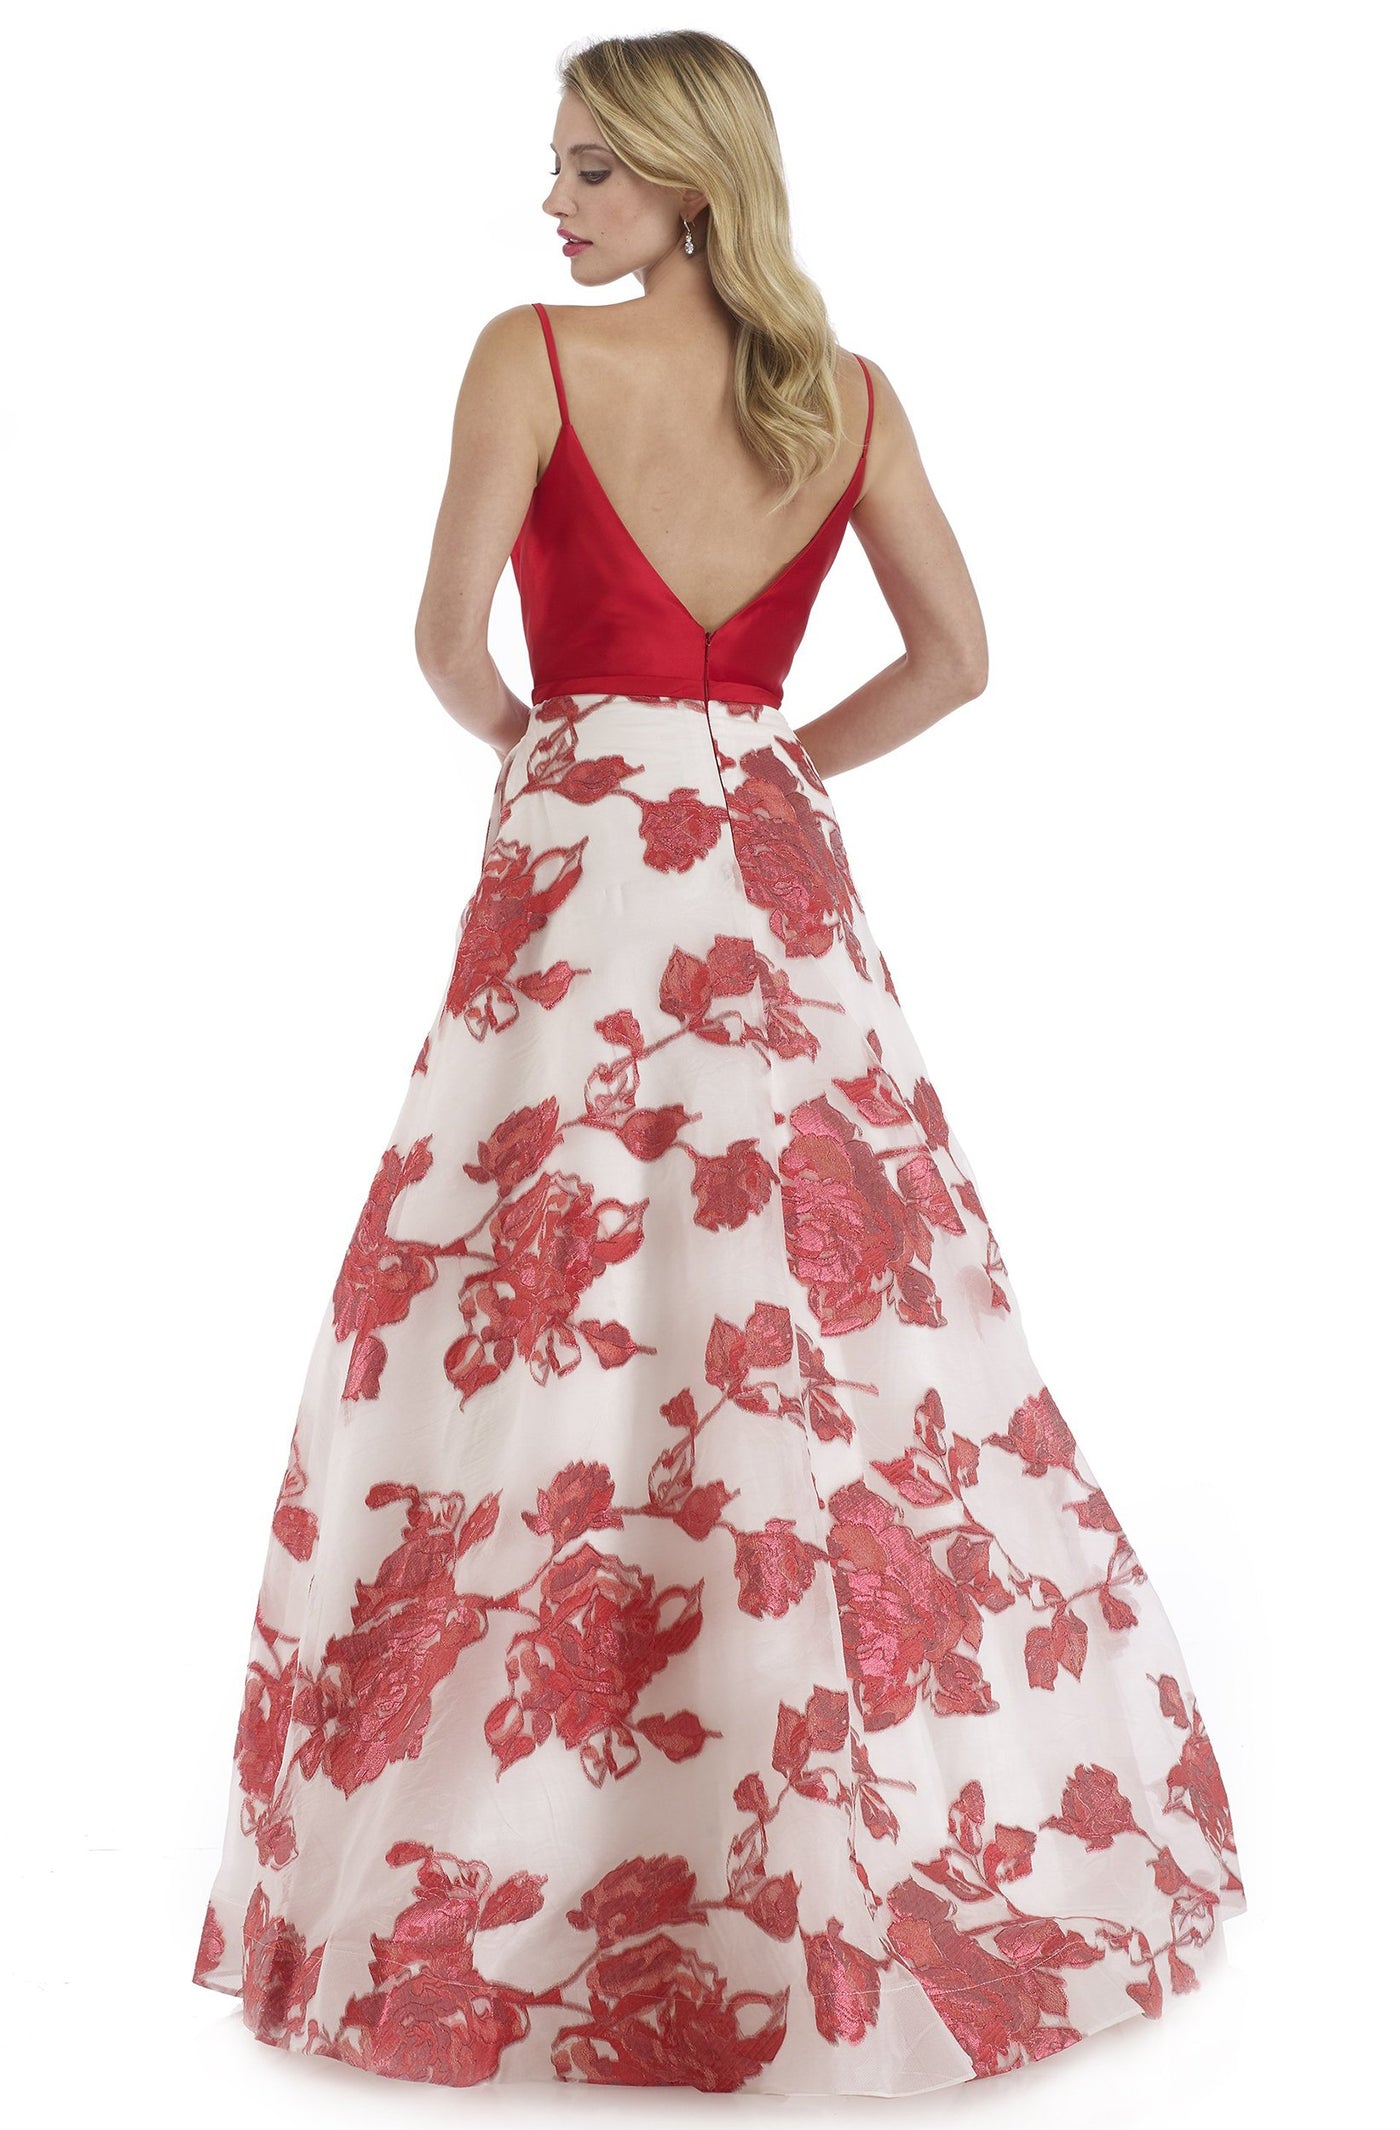 Morrell Maxie - 16090 Mikado Deep V-neck Brocade A-line Dress in Red and White